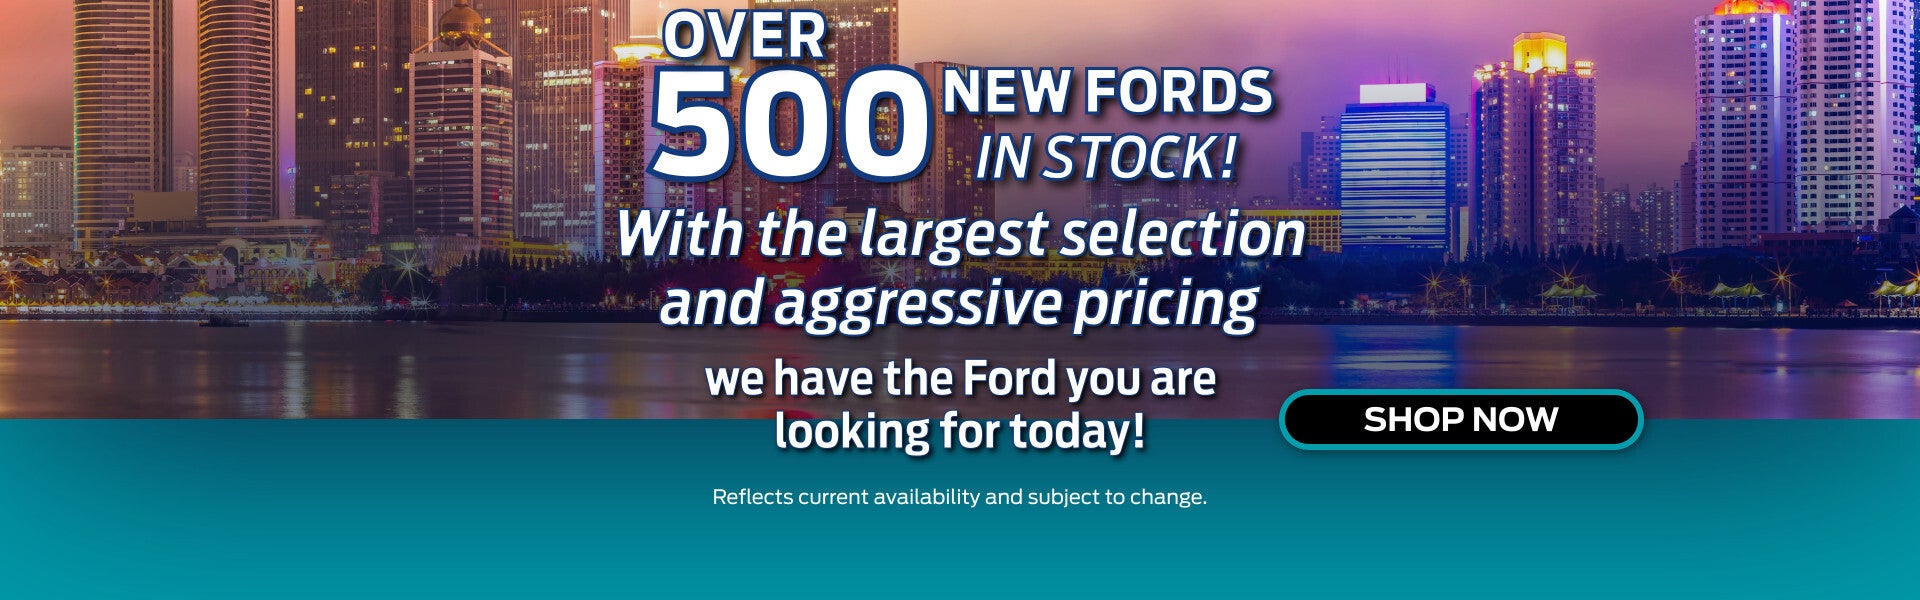 Over 500 vehicles in stock